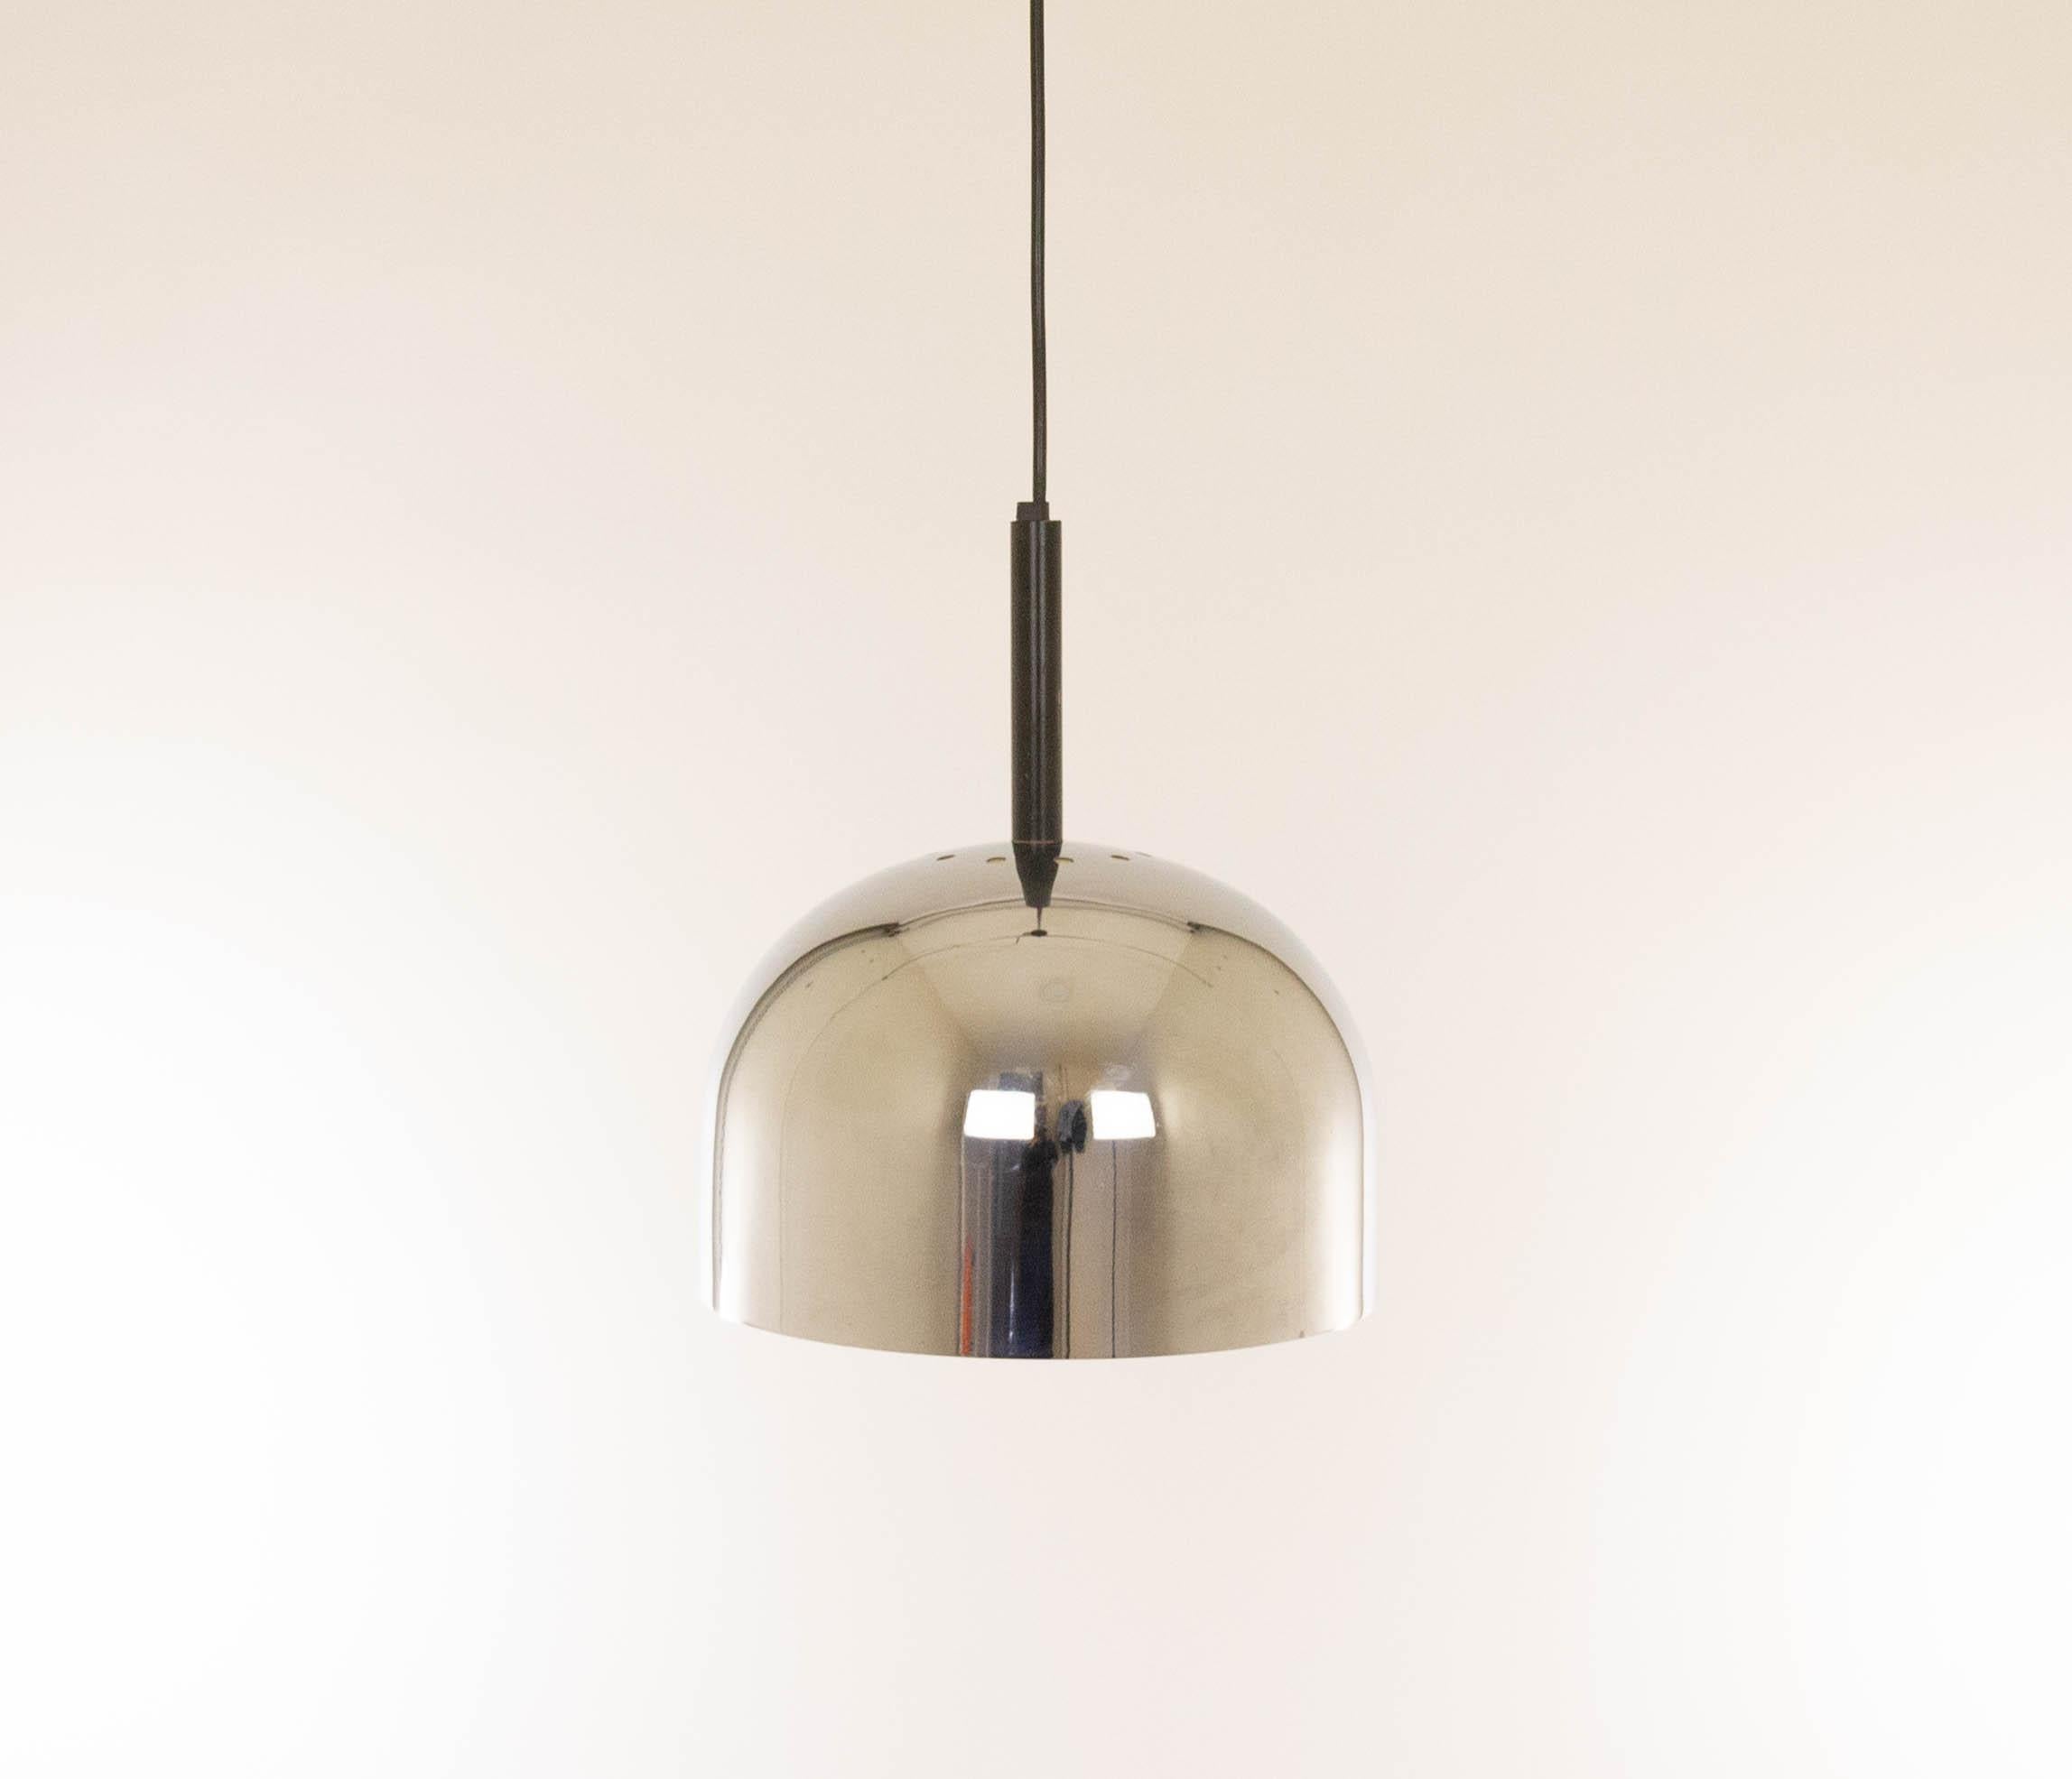 Chrome pendant No. 6505 designed by Gae Aulenti and Livio Castiglioni and produced by Stilnovo Milano in the 1970s.

The condition of this pendant is very good. The diameter of the lamp is 32 cm / 13 inches.

Two pendants available; the price is per